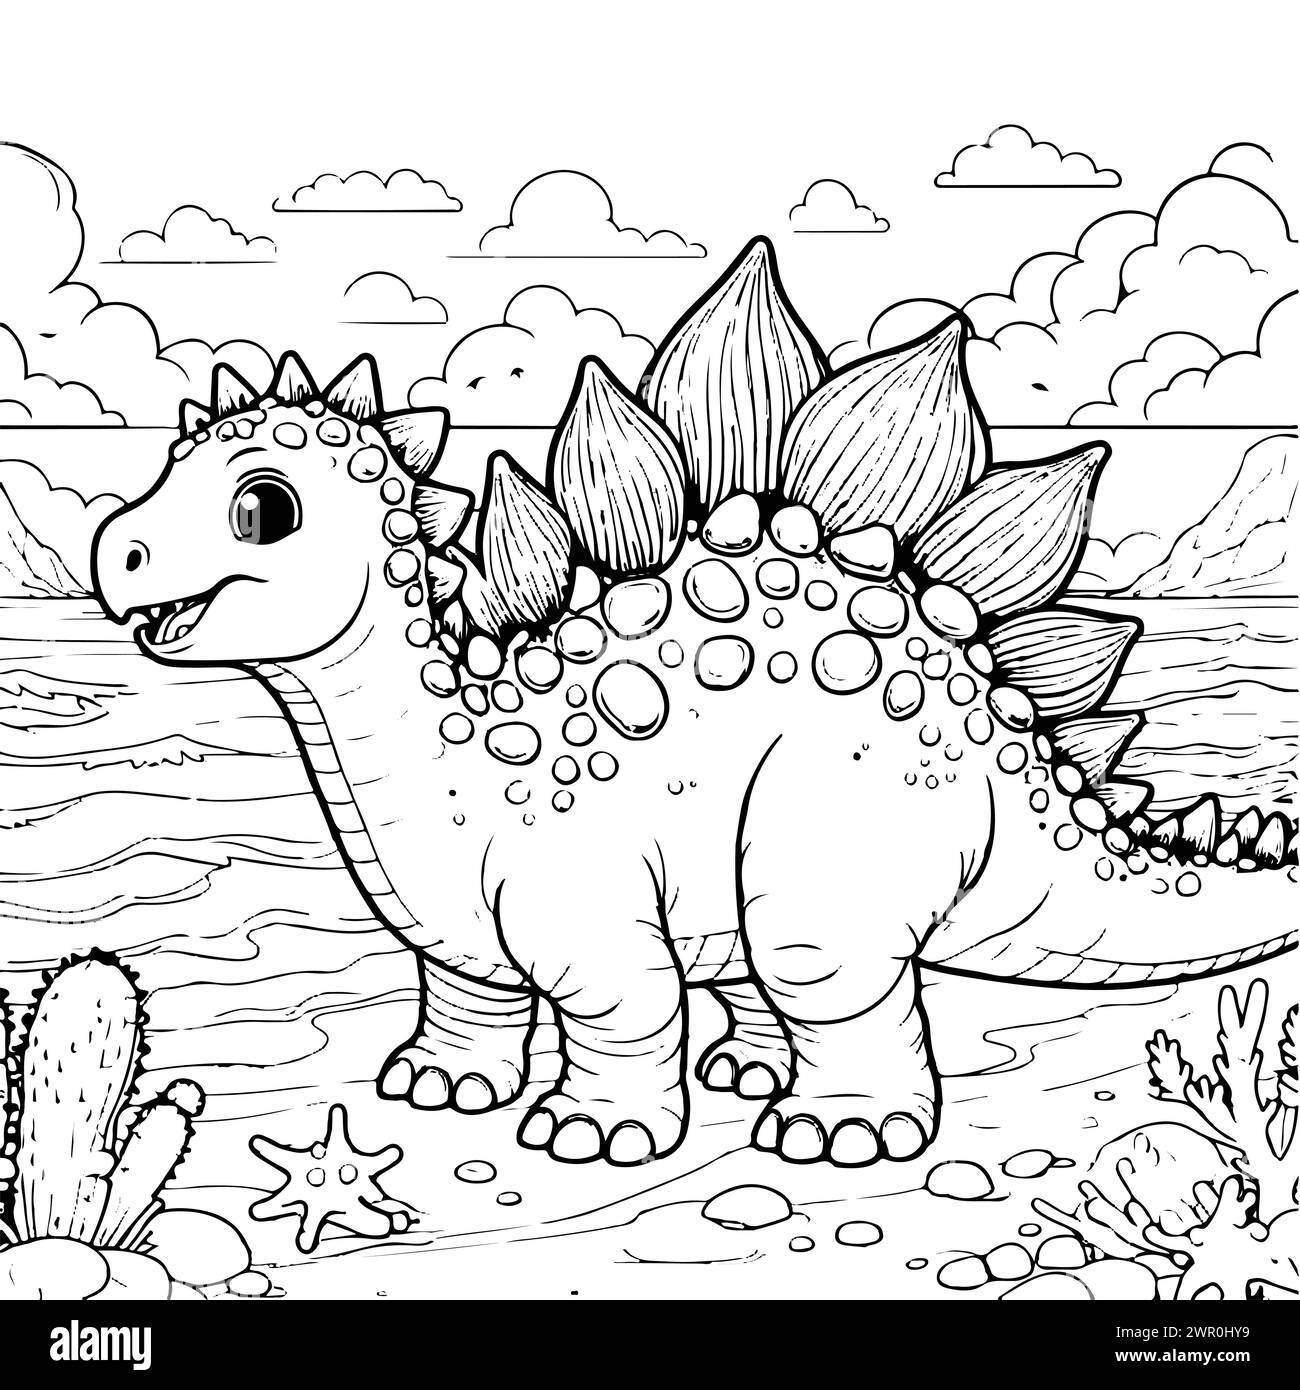 coloring draw dinosaur stegosaurus in the sea and jungle background and happy black and white version good for kids Stock Vector